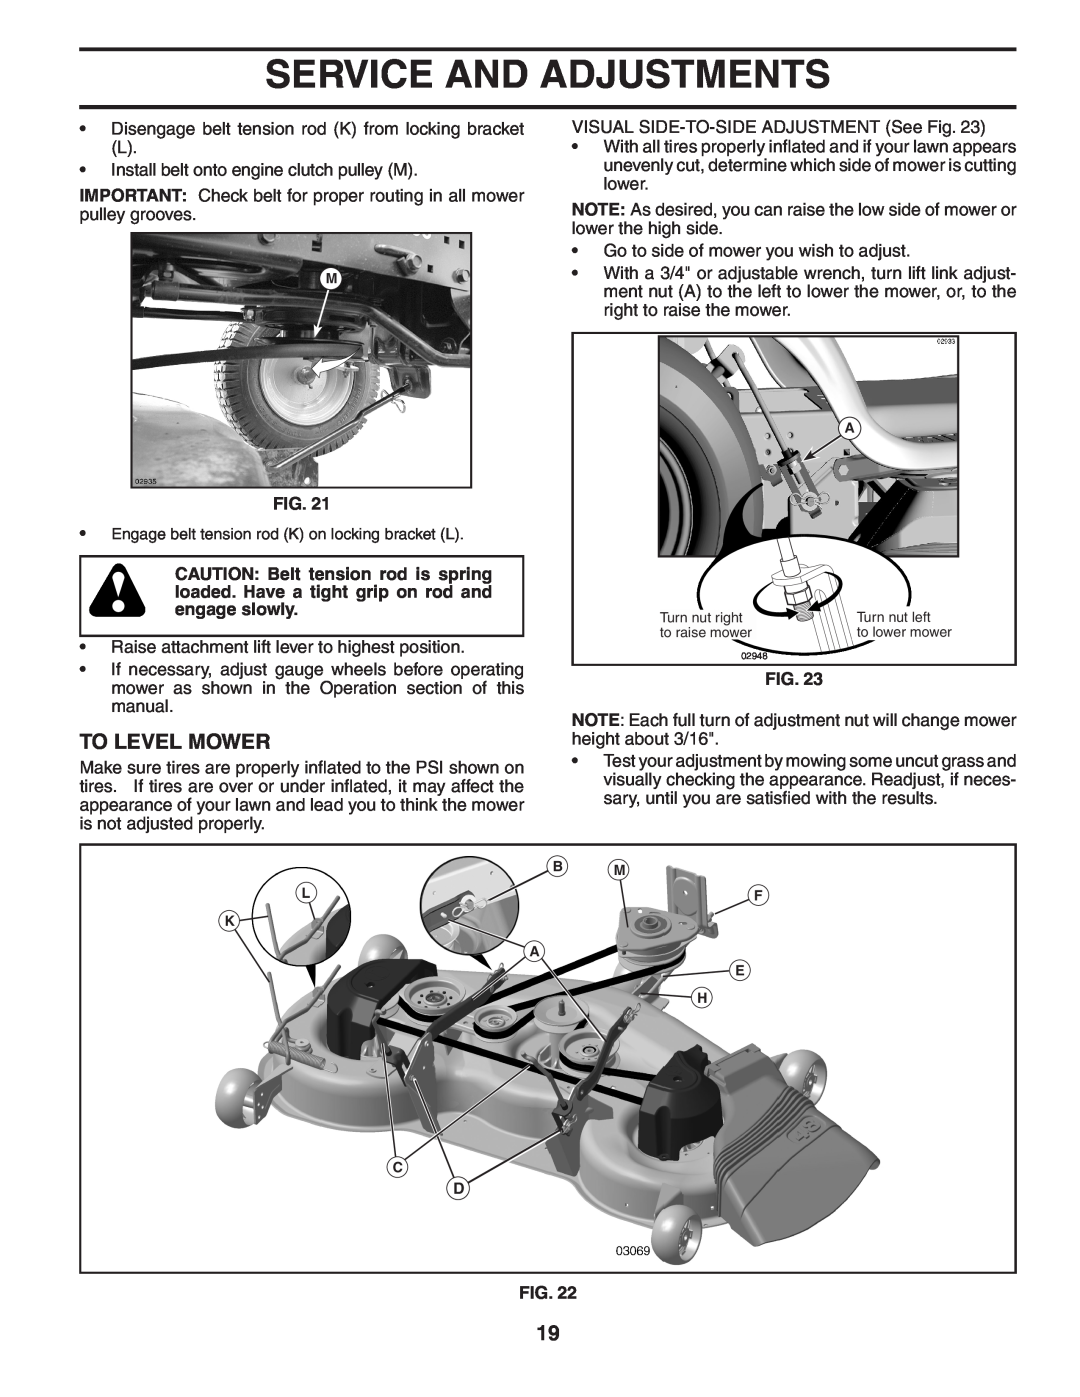 Poulan 404489 manual To Level Mower, Service And Adjustments 